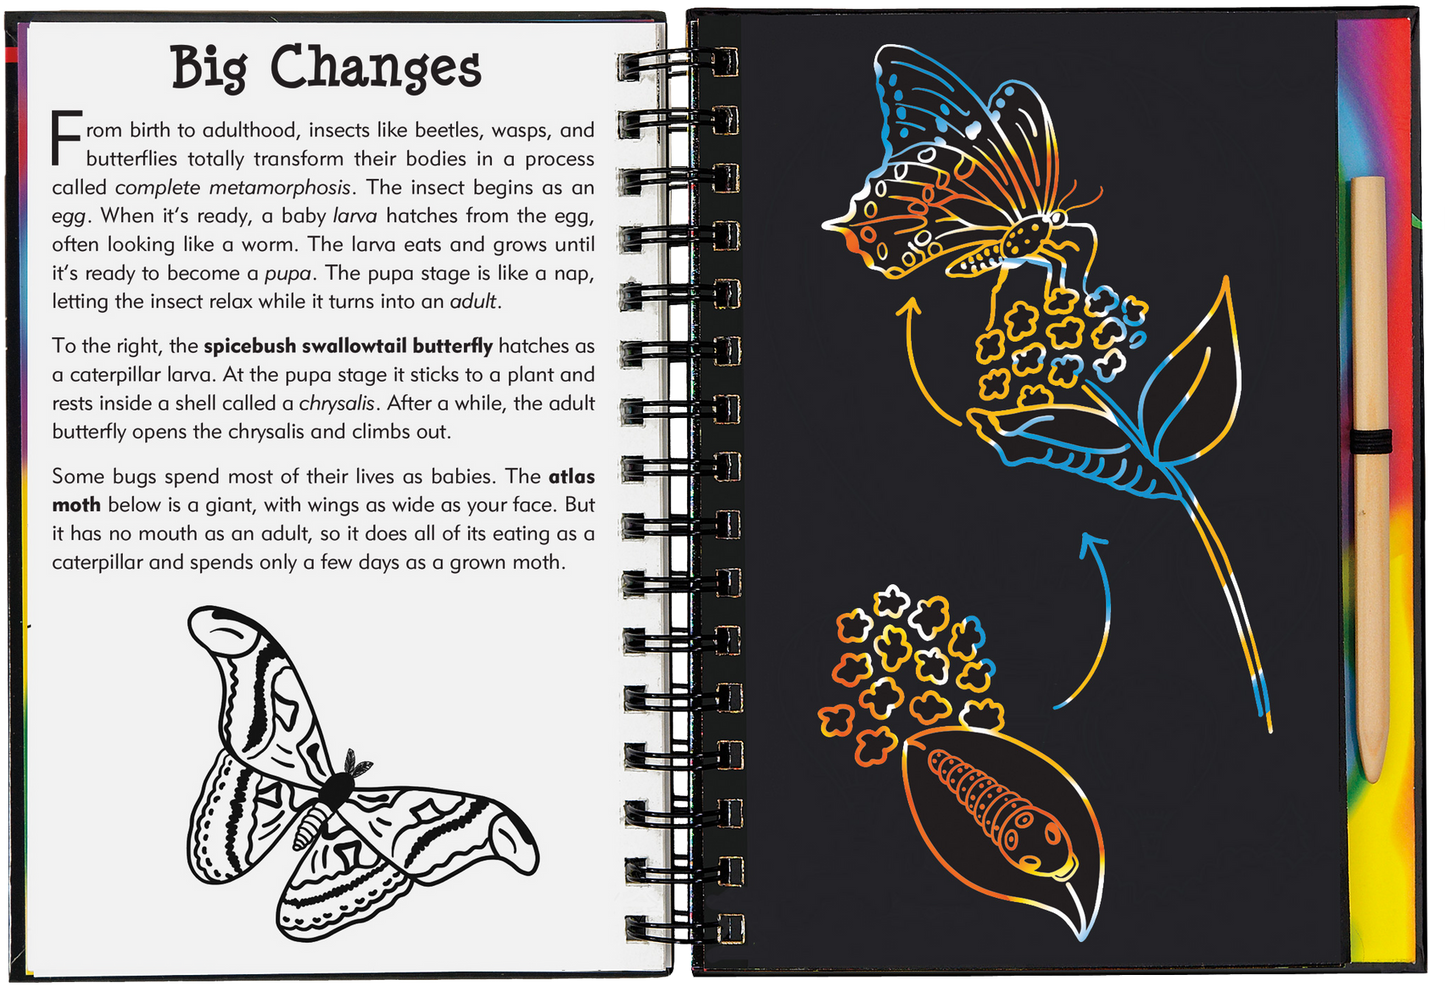 This is a Trace-Along Scratch and Sketch! White outlines on black scratch-off pages create a fun way for younger children (5 and up) to trace each illustration, revealing patterns, swirls, and holographic colors.